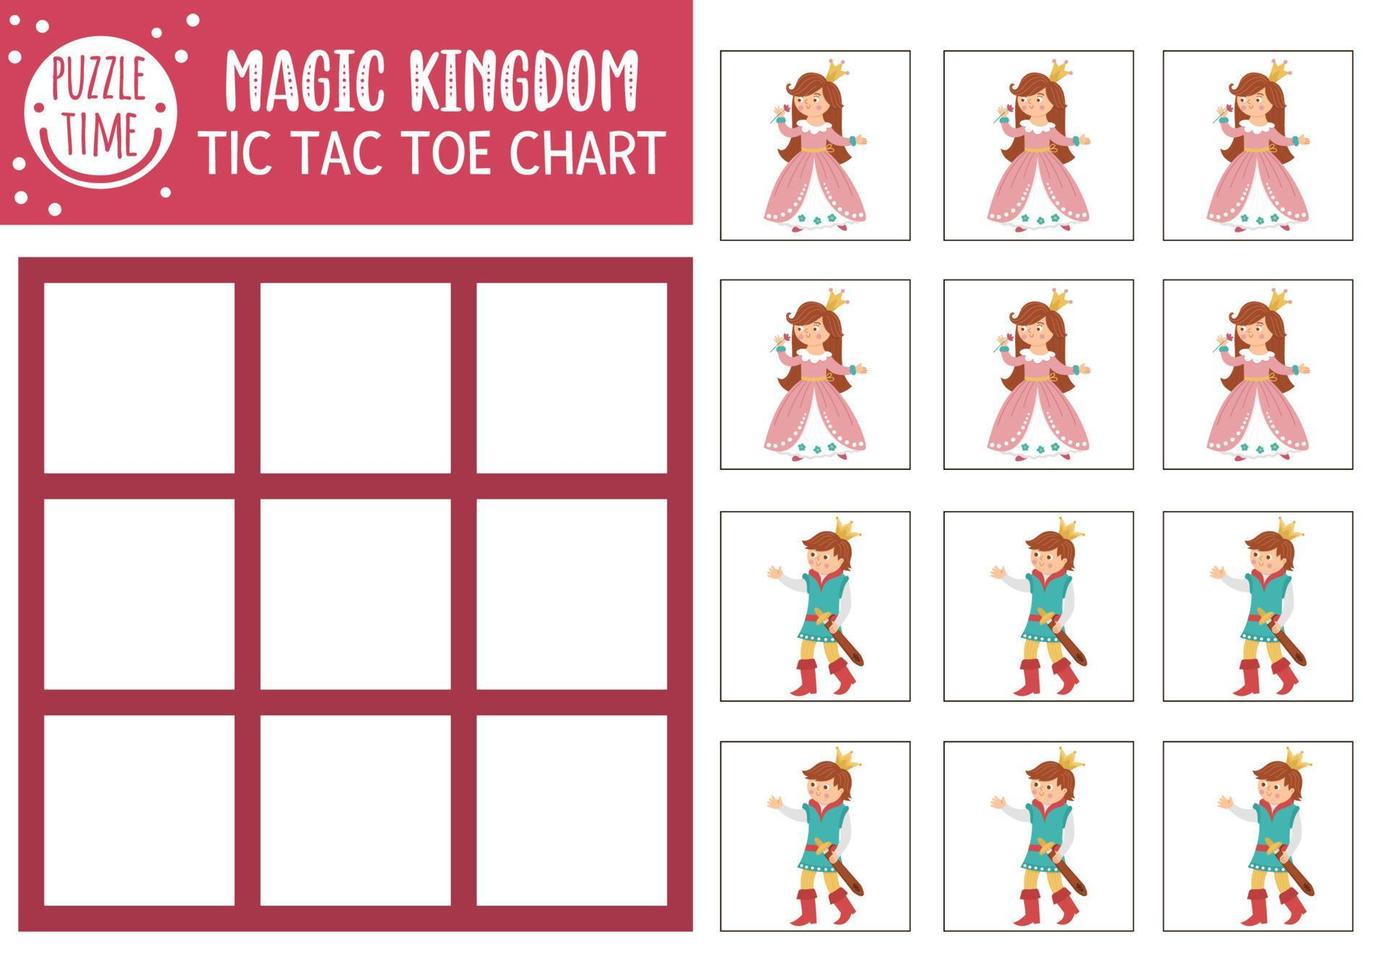 Vector fairytale tic tac toe chart with prince and princess. Fairy tale holiday board game playing field with fantasy characters. Funny magic kingdom printable worksheet. Noughts and crosses grid